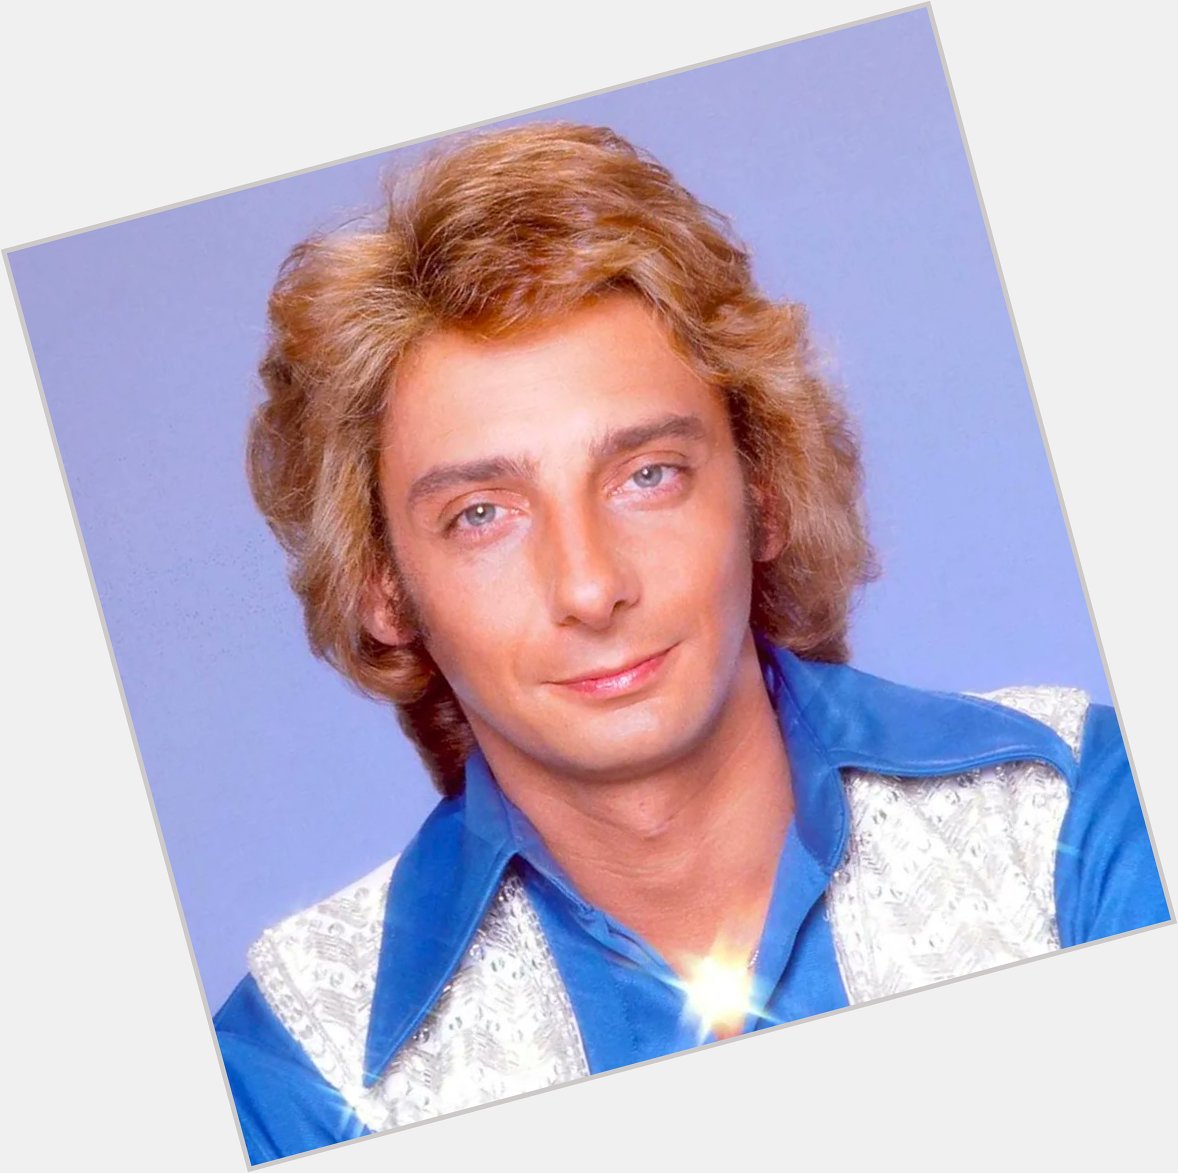 Happy birthday Barry Manilow!
Oh, BARRY
Well, you came and you gave without taking
But I sent you awaaaaayyyyyyyyy 